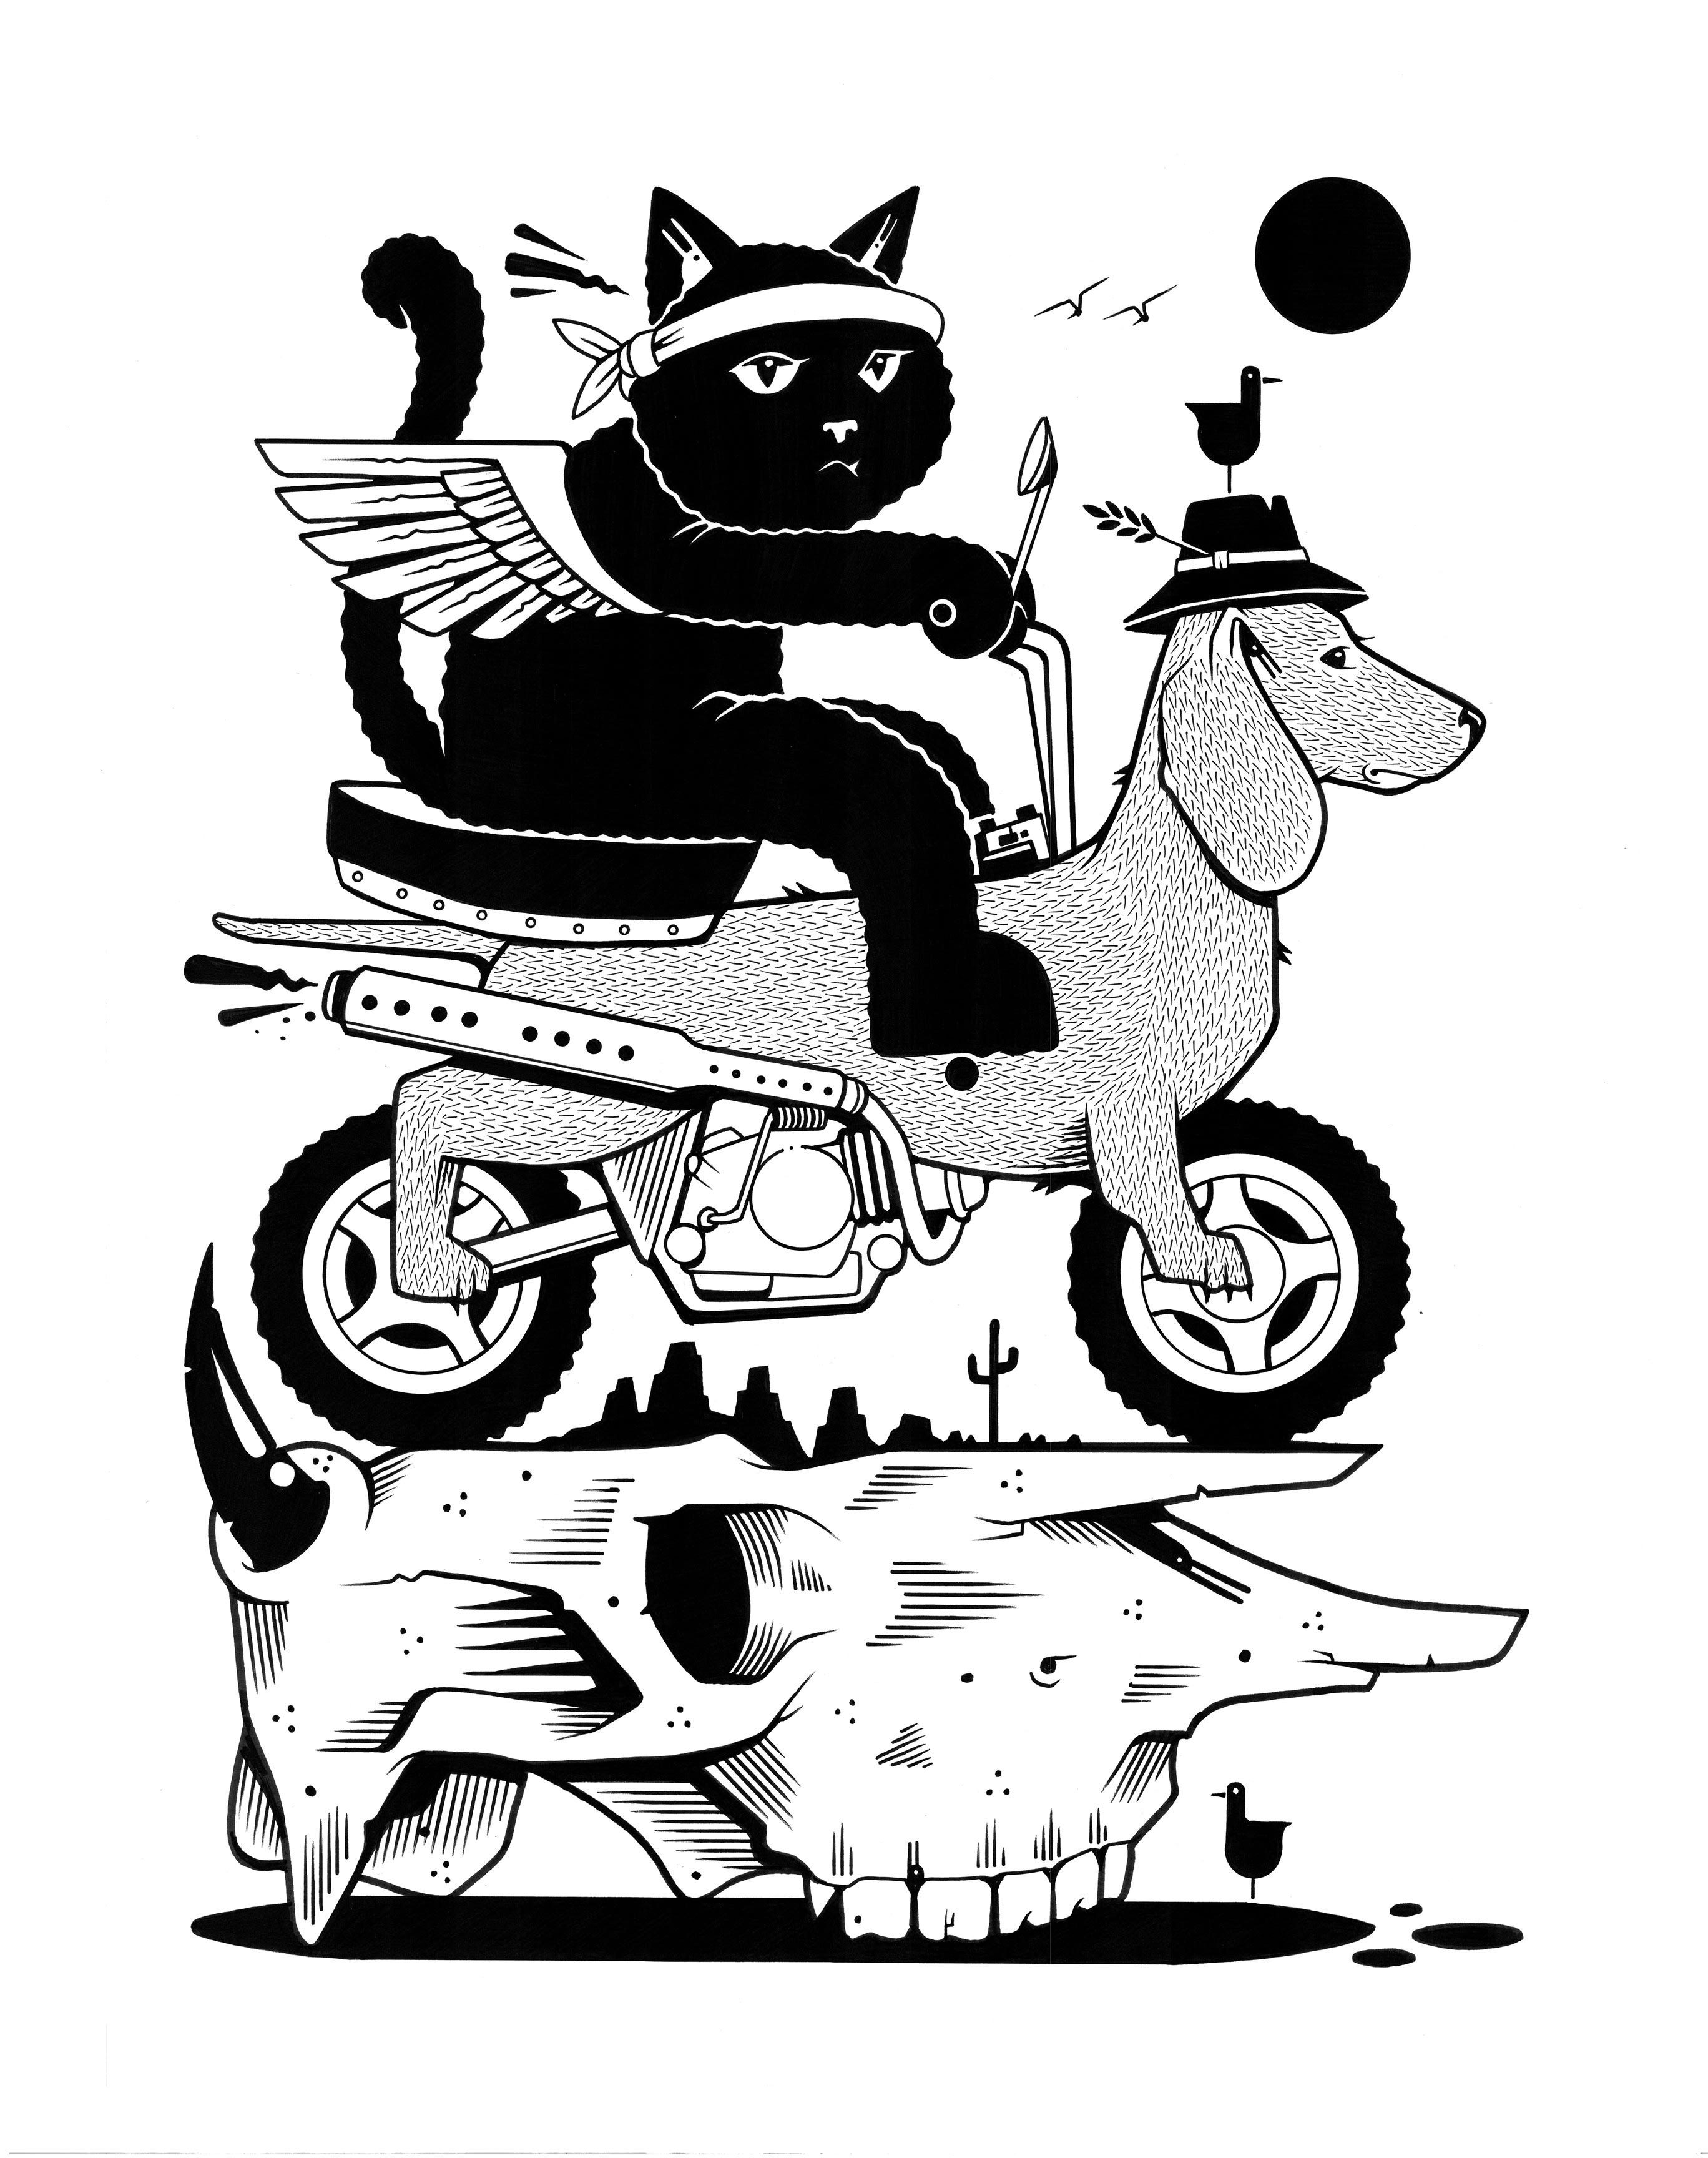 Jeremy Fish drawing of a Cat riding a dog motorcycle